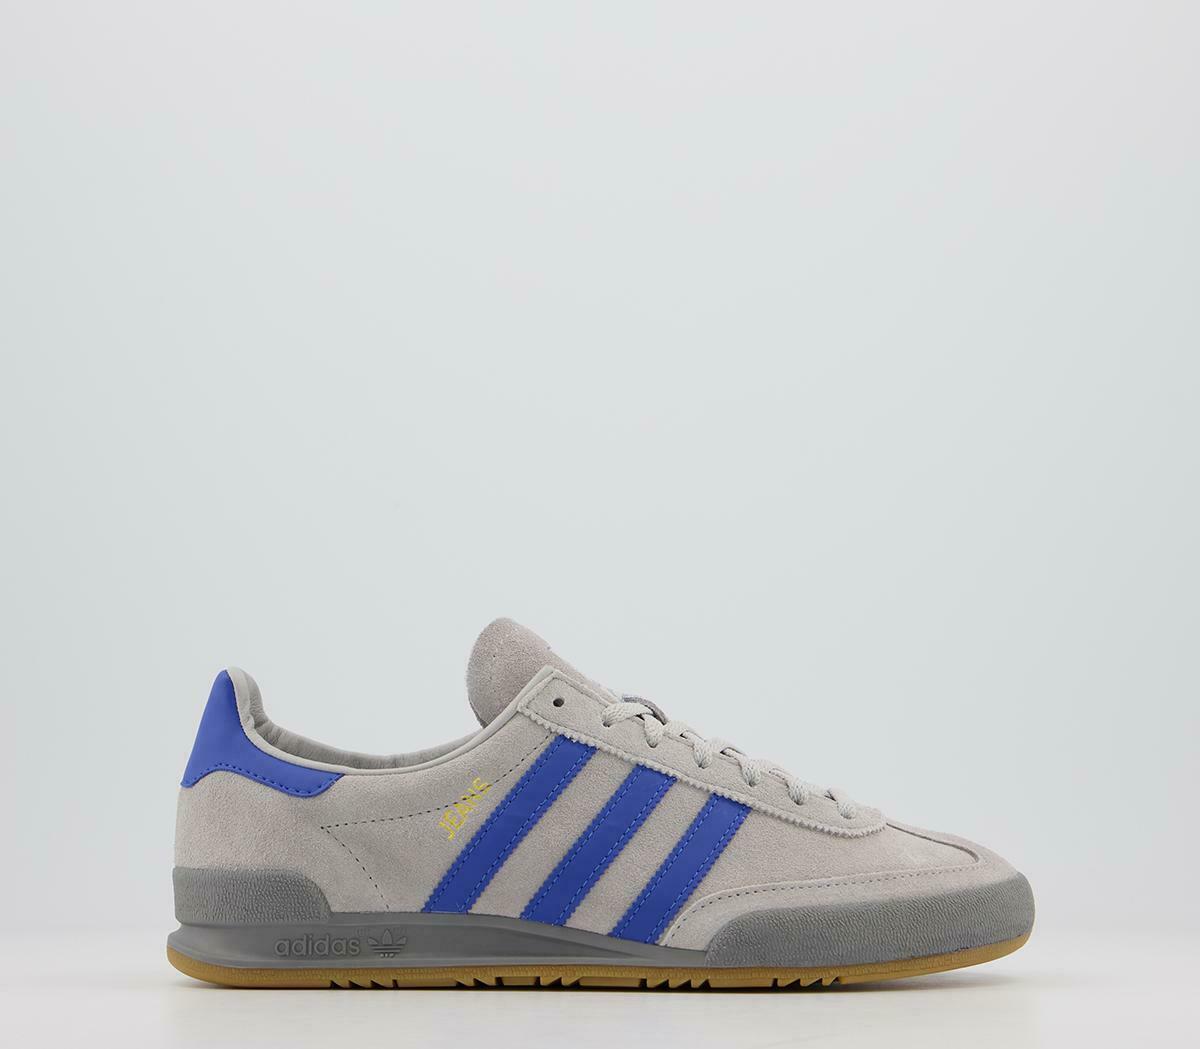 Adidas Originals Jeans Mens Trainers in Grey and Blue Suede Leather Shoes